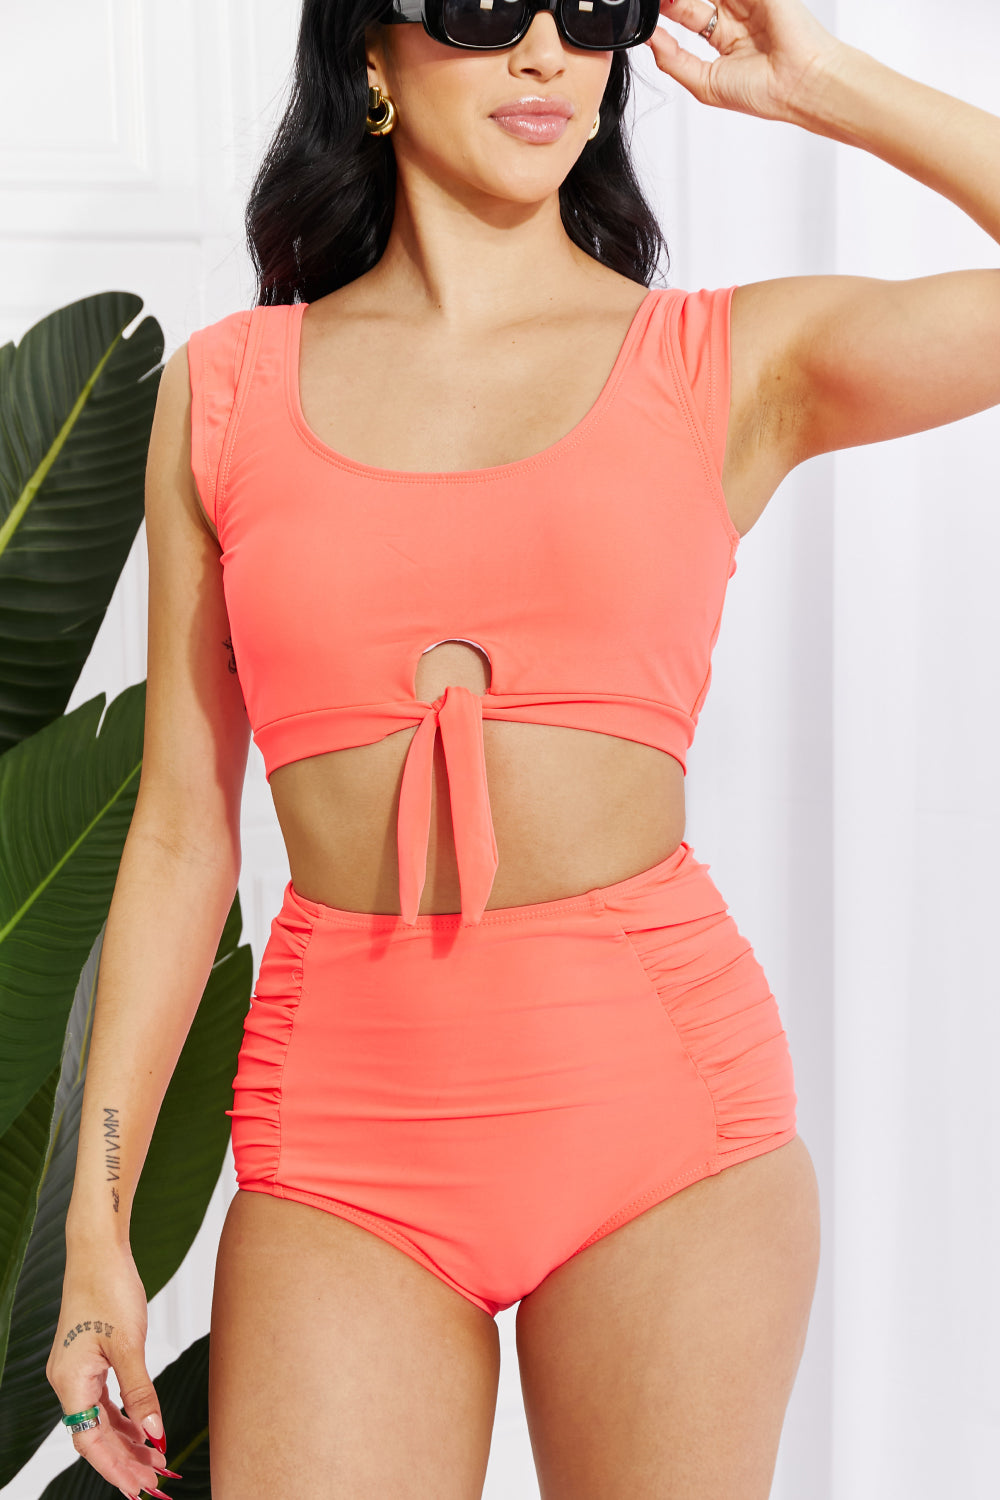 Marina West Swim Sanibel Crop Swim Top and Ruched Bottoms Set in Coral Sunset and Swim   